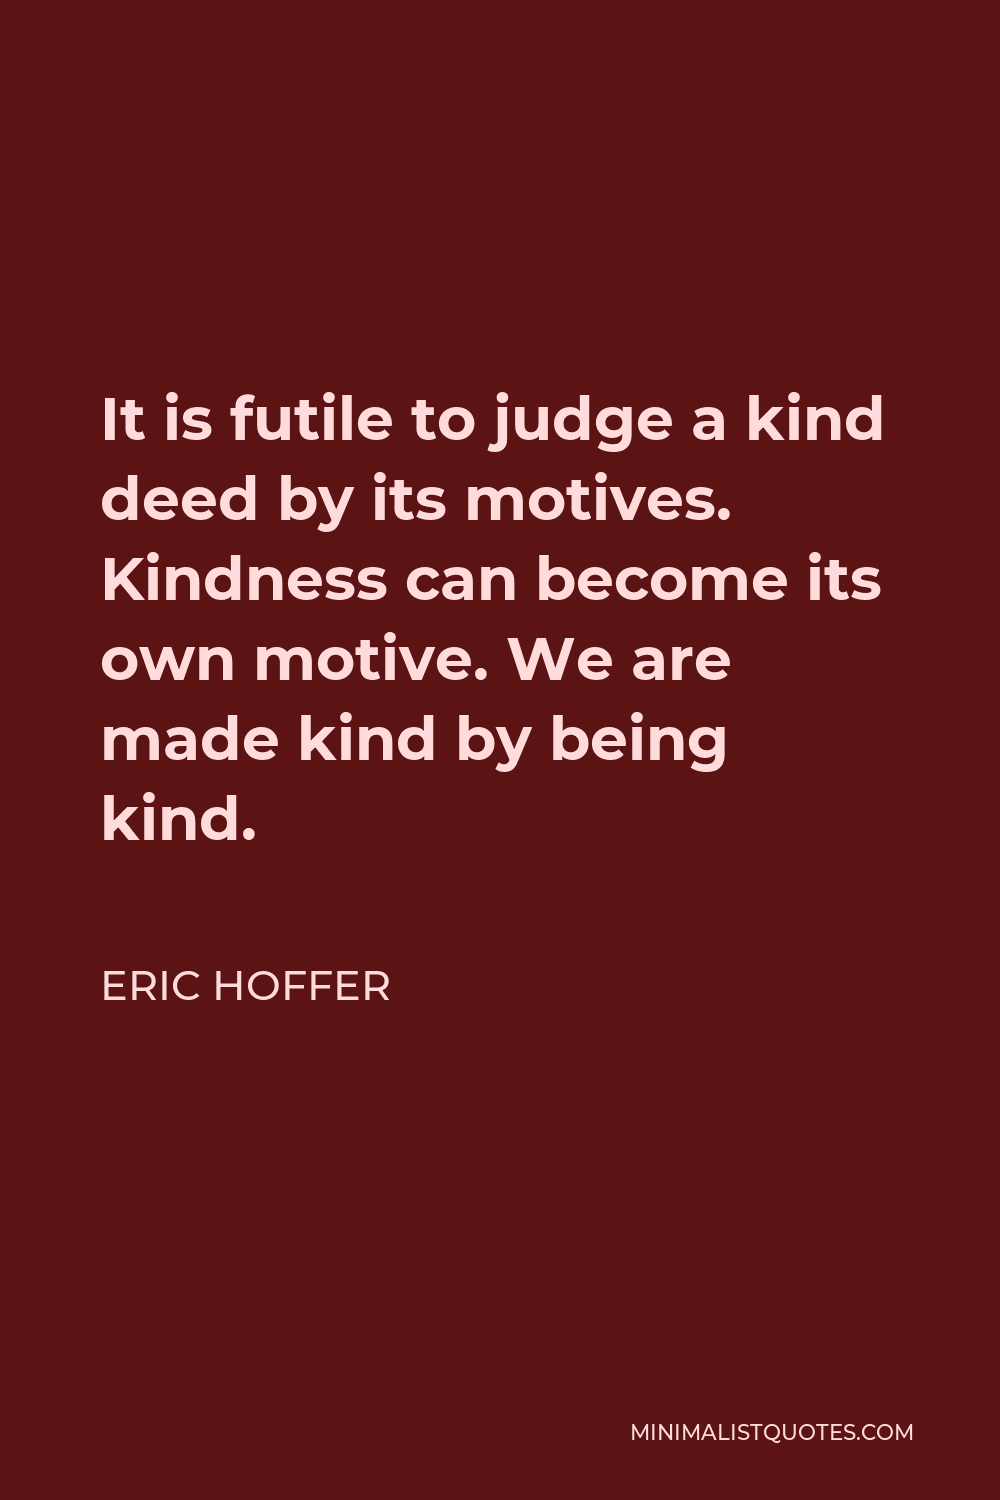 Eric Hoffer Quote: It is futile to judge a kind deed by its motives ...